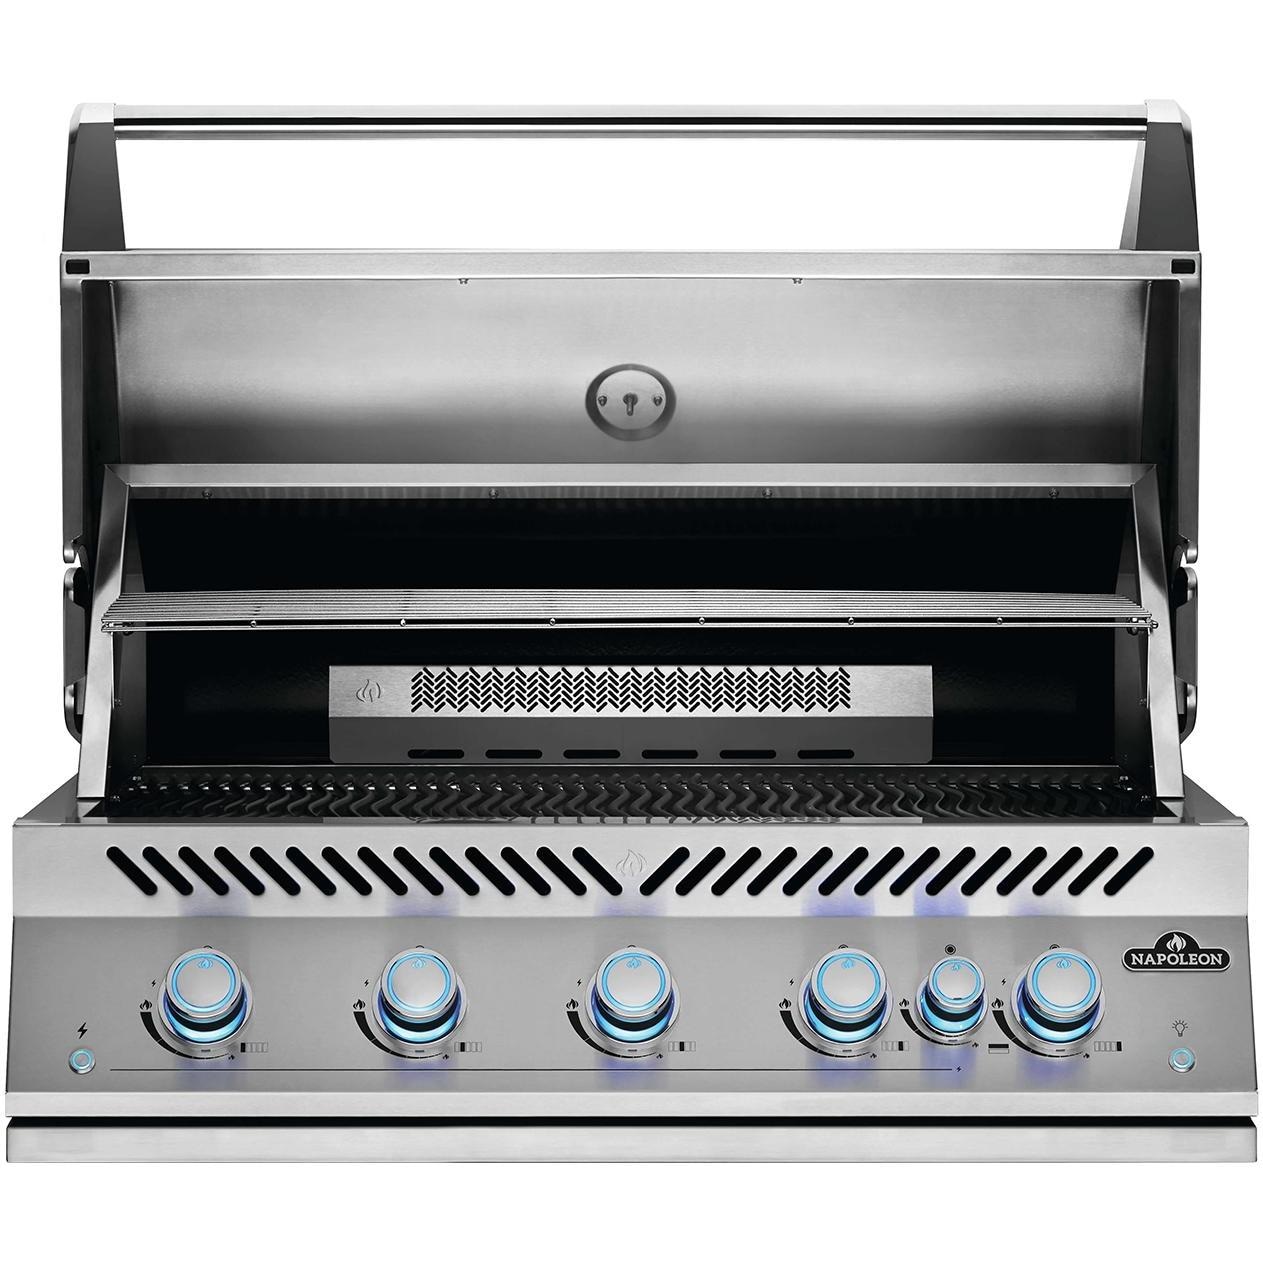 Napoleon Built-In 700 Series 38-Inch Propane Gas Grill w/ Infrared Rear Burner & Rotisserie Kit - BIG38RBPSS - image 4 of 6